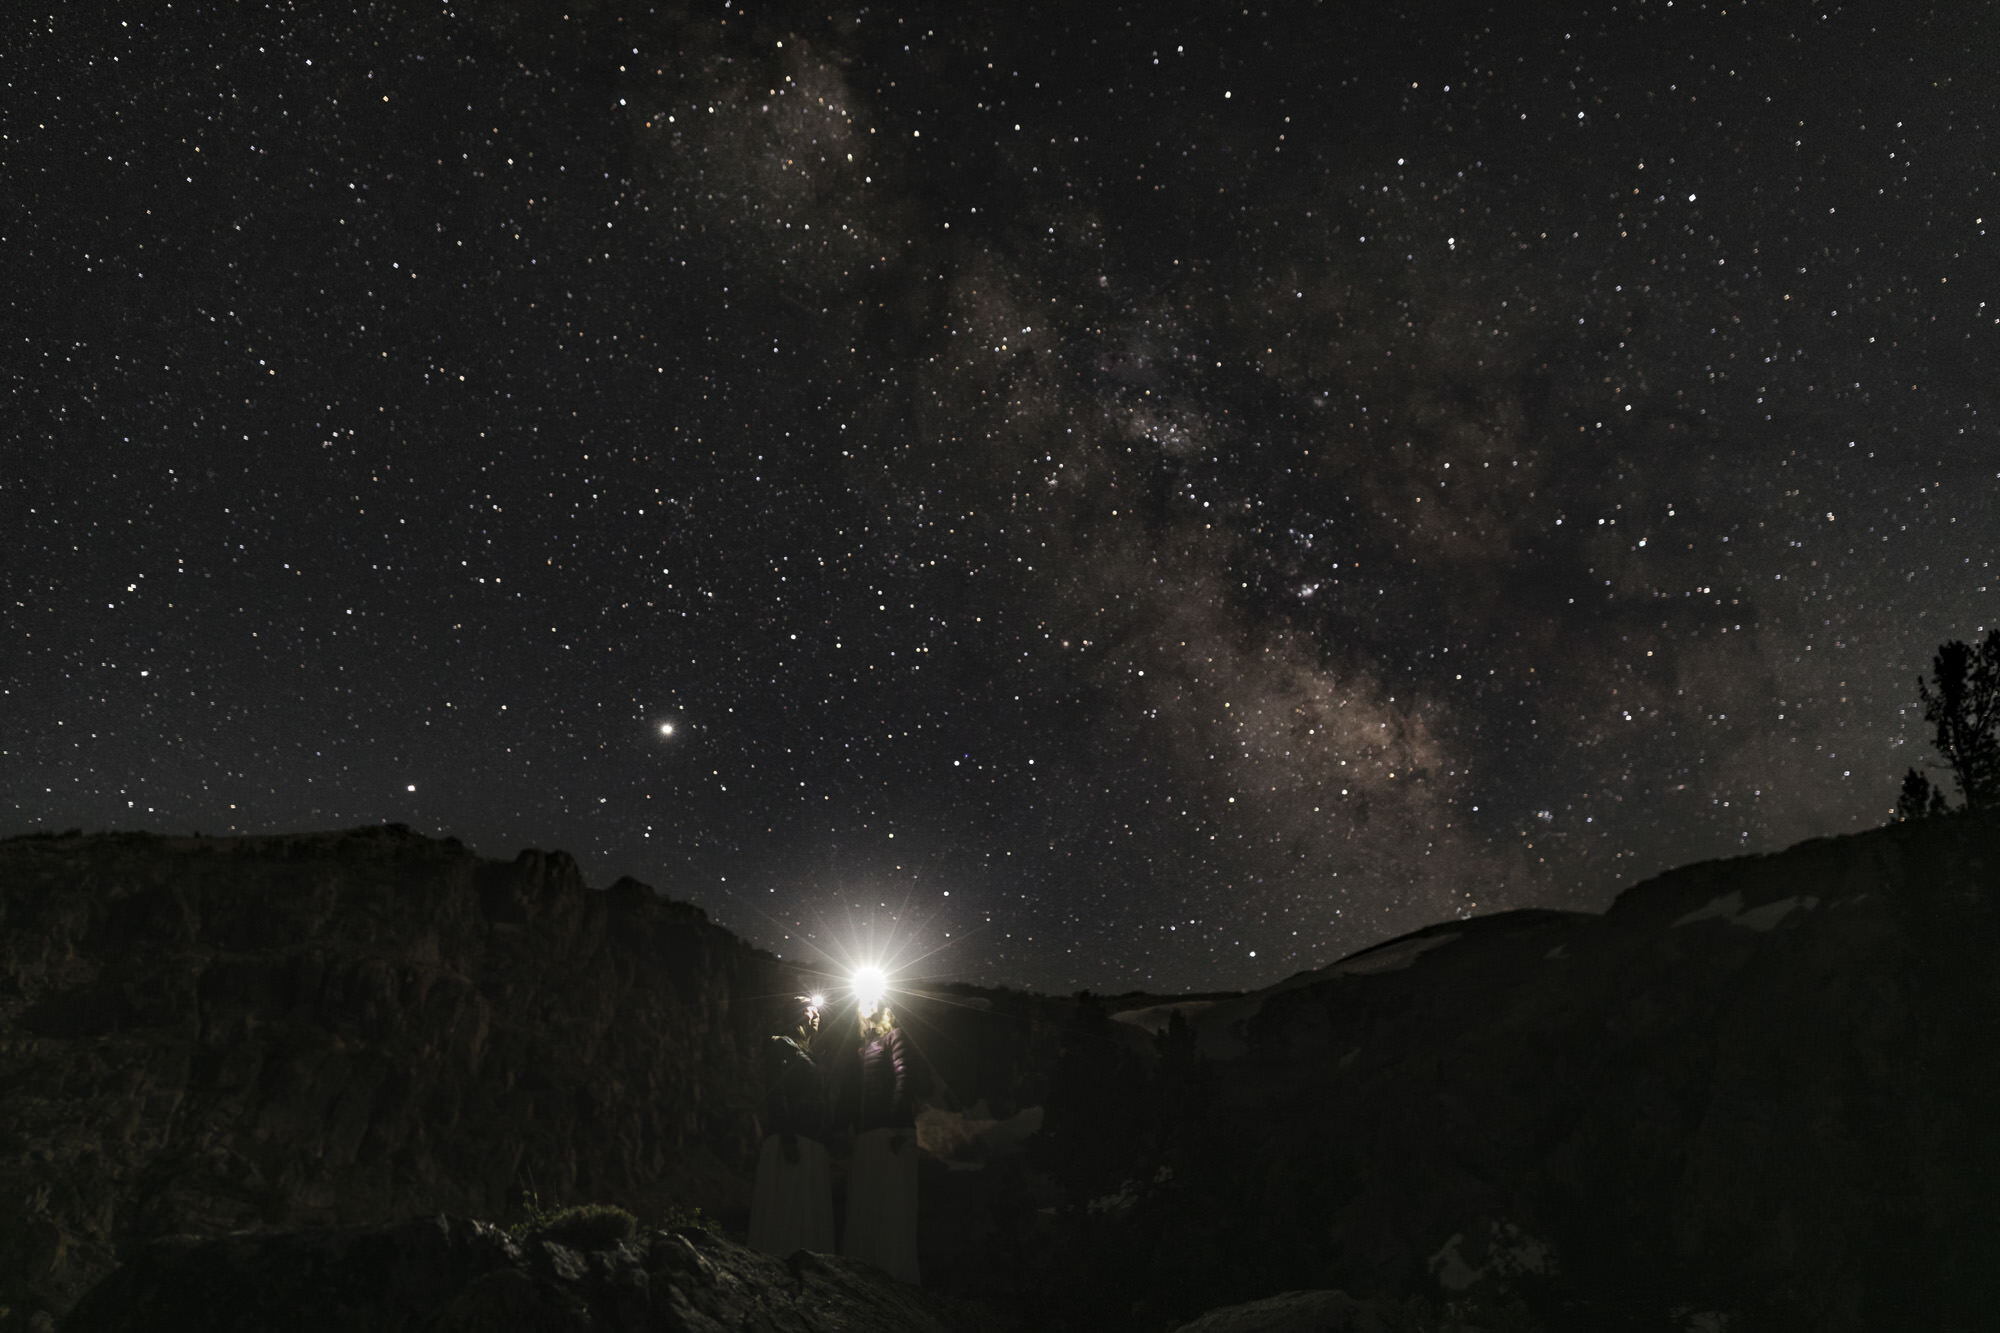 Wedding couple admire the Milky Way while shining their headlamps into the night sky